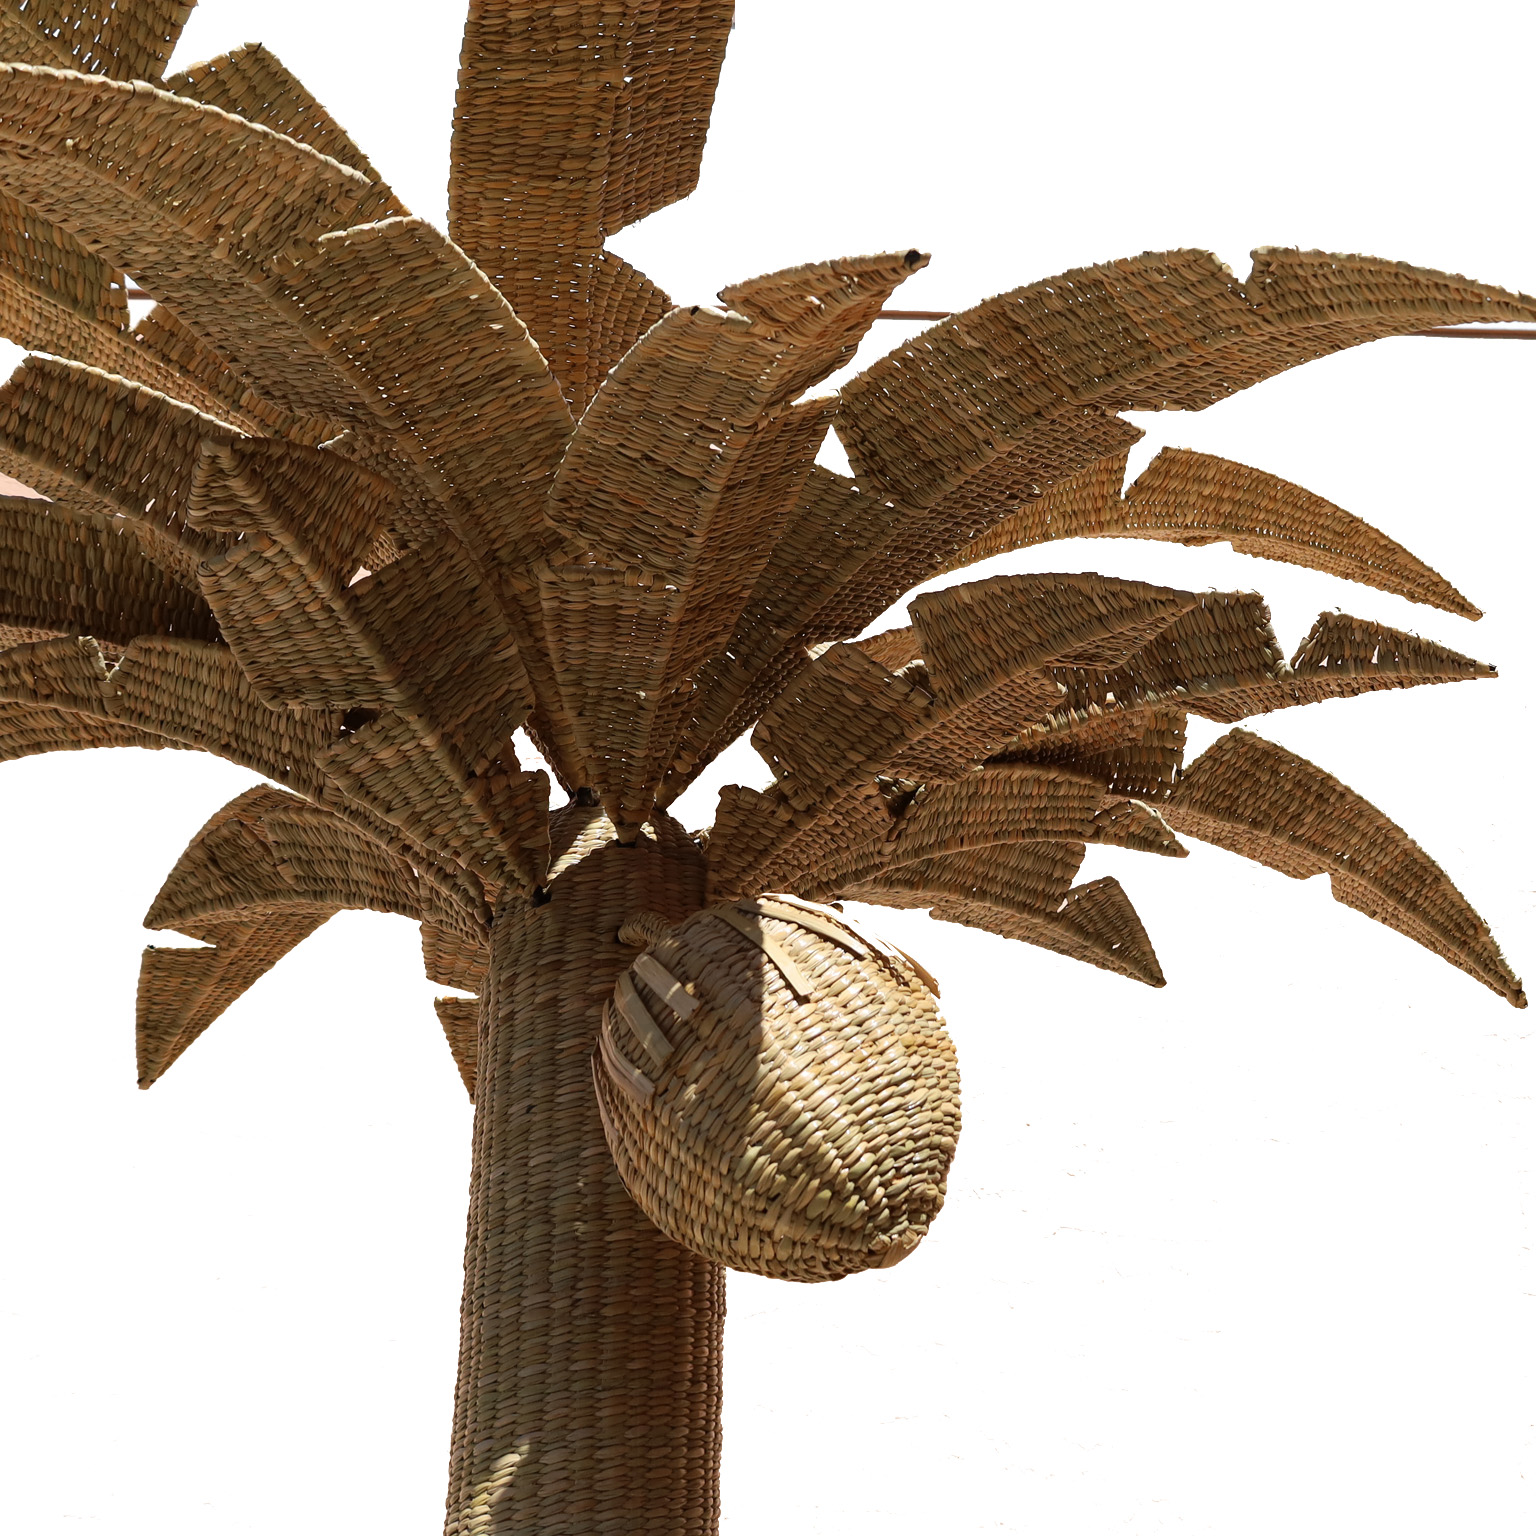 Life Size Wicker Palm Tree Sculpture from the FS Flores Collection